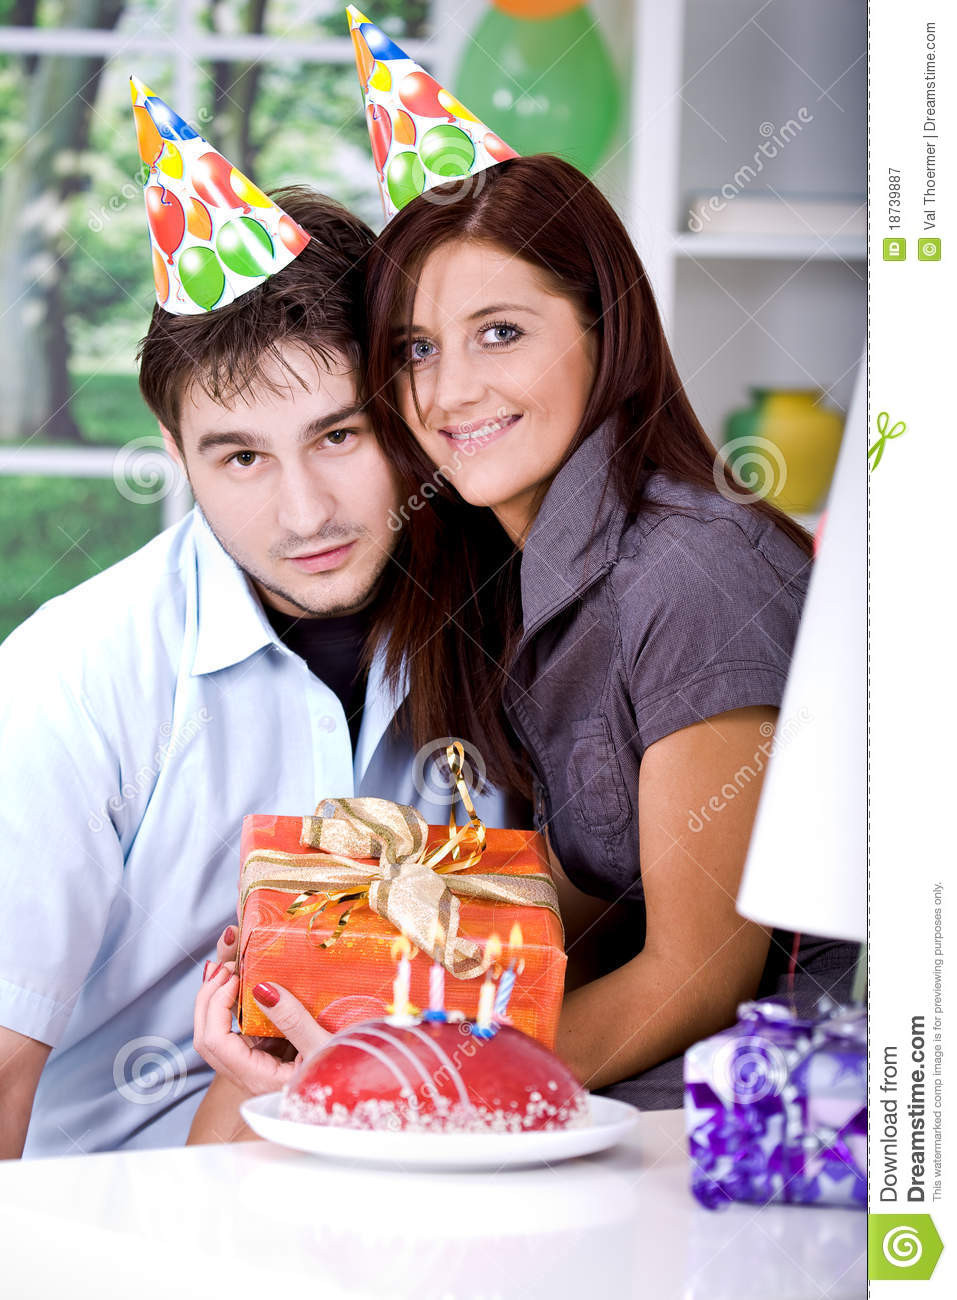 Gift Ideas For Young Couple
 Young couple with ts stock image Image of lifestyles